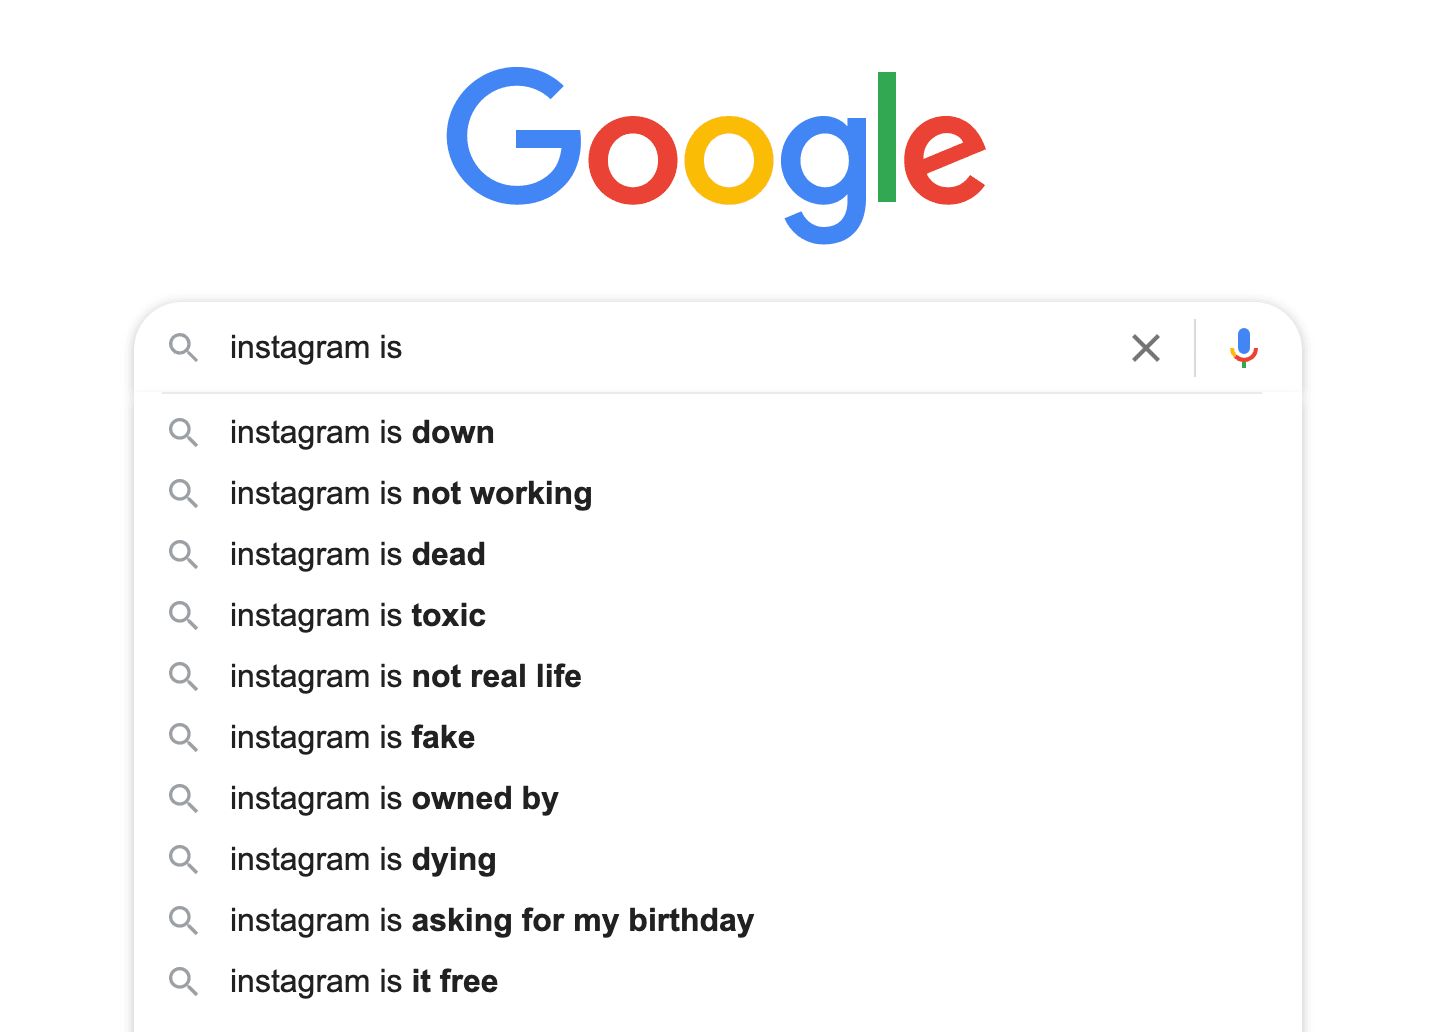 A google search starting with Instagram is - showing suggestions such as Instagram is dead, instagram is toxic